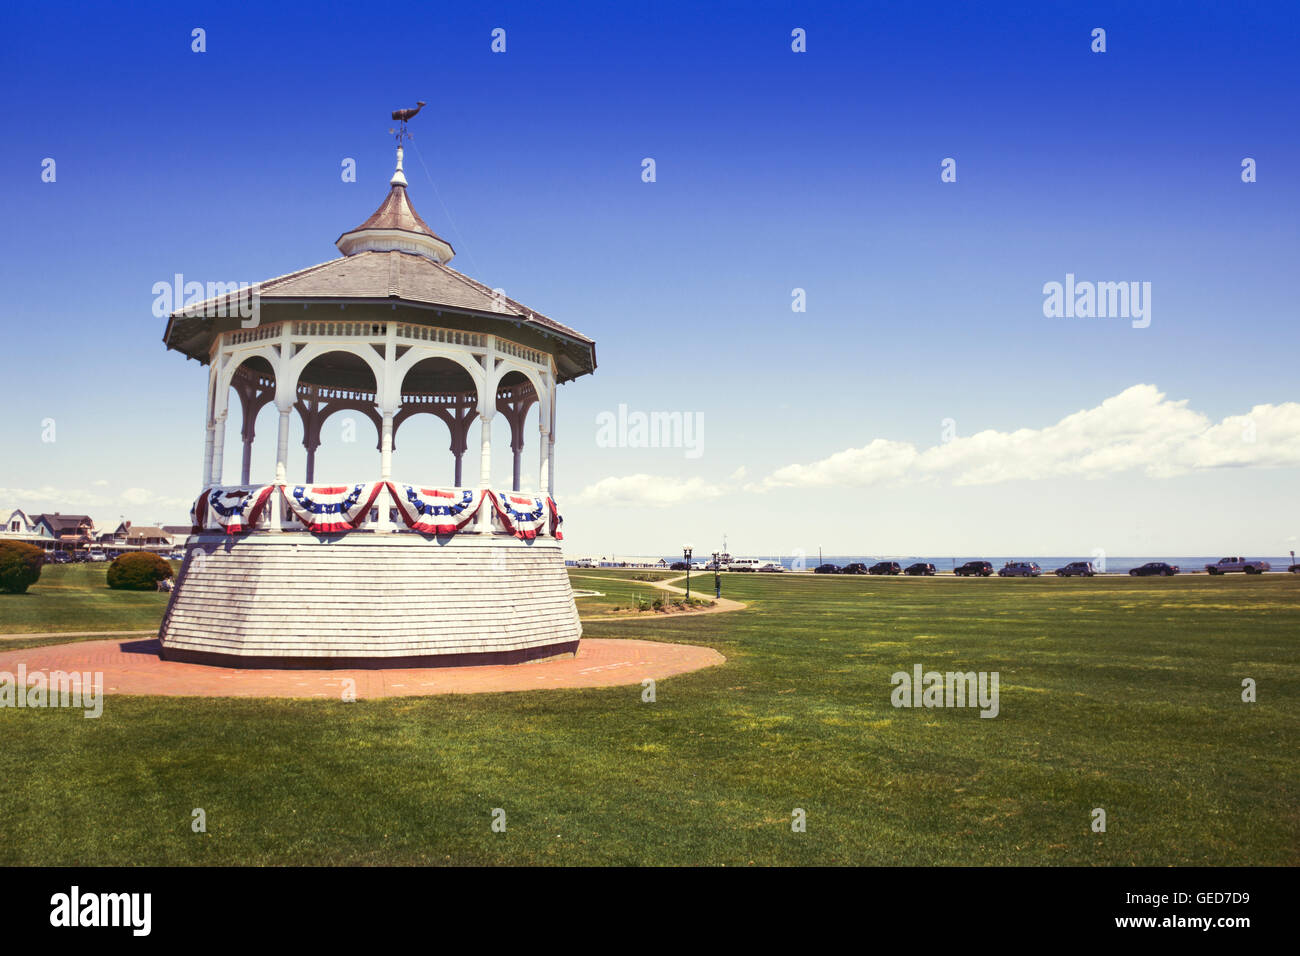 Gazebo with red, white and blue decoration in a park in Oak Bluffs, Massachusetts on Martha's Vineyard. Stock Photo